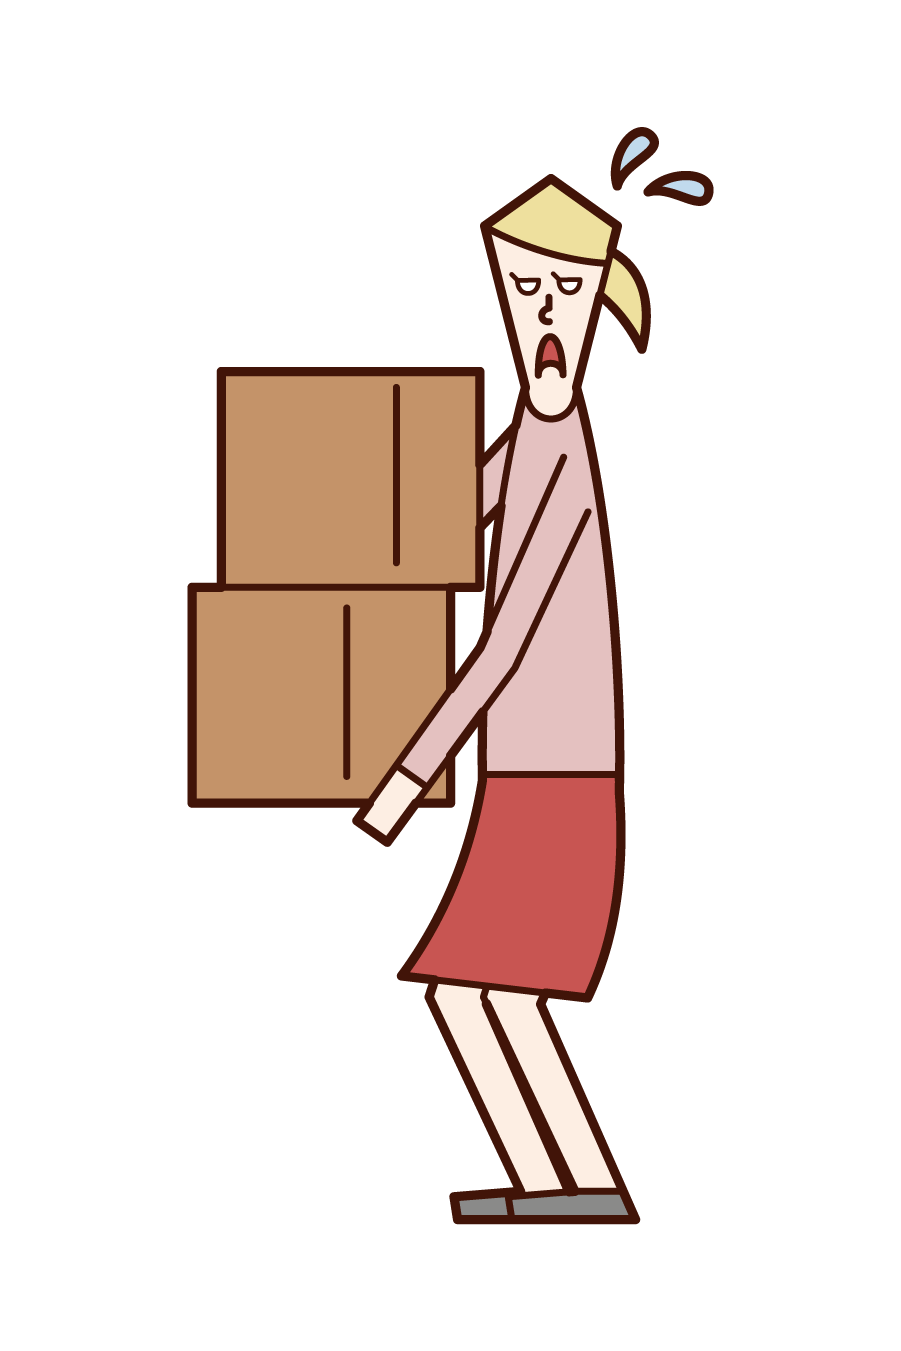 Illustration of a woman carrying heavy baggage